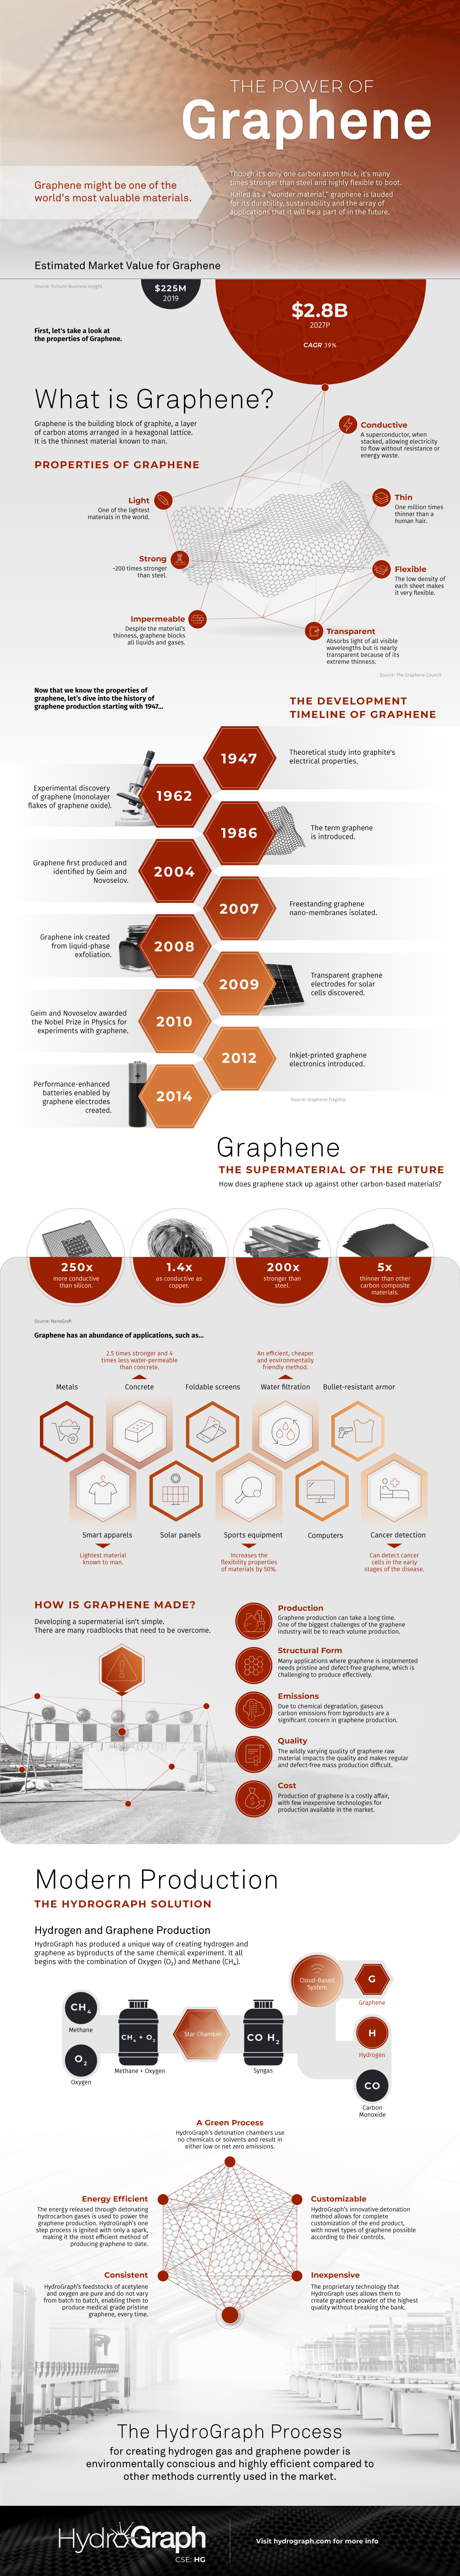 Graphene: The Wonder Material of the Future